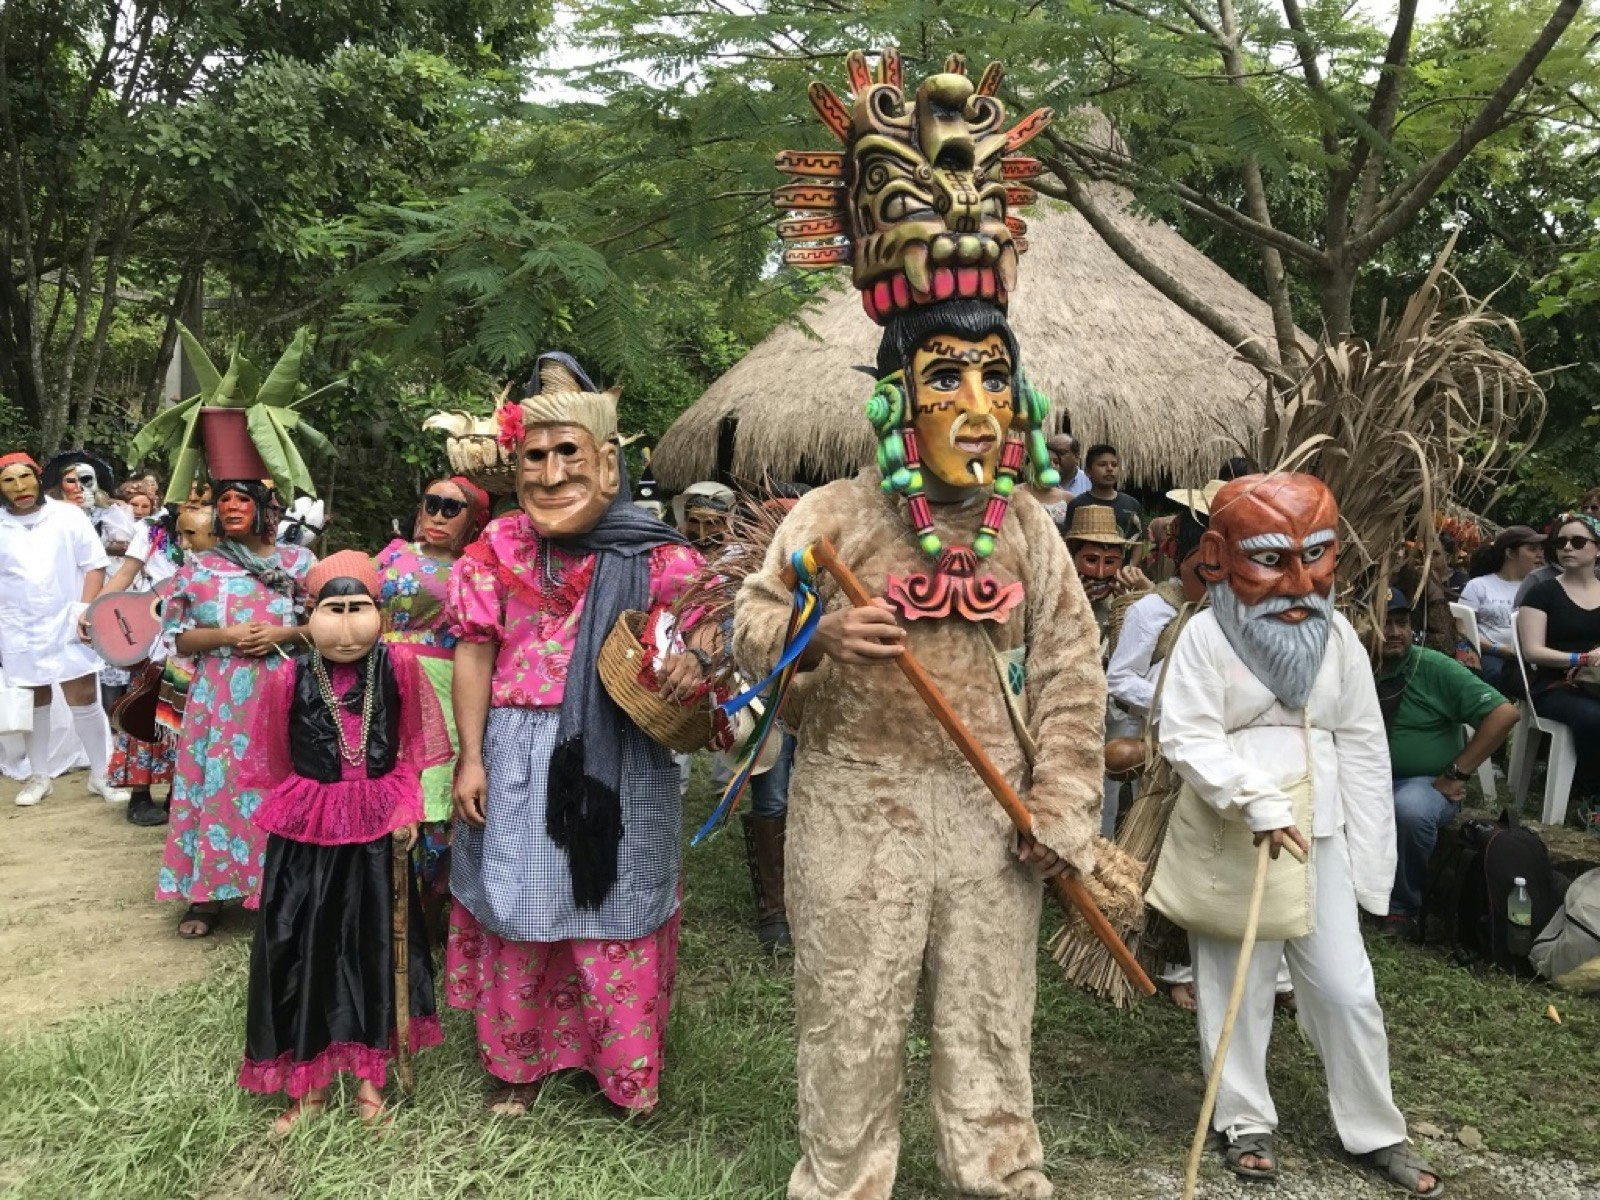 A procession of people dressed in traditional colorful garb and wearing large masks walk through a village; Xantolo